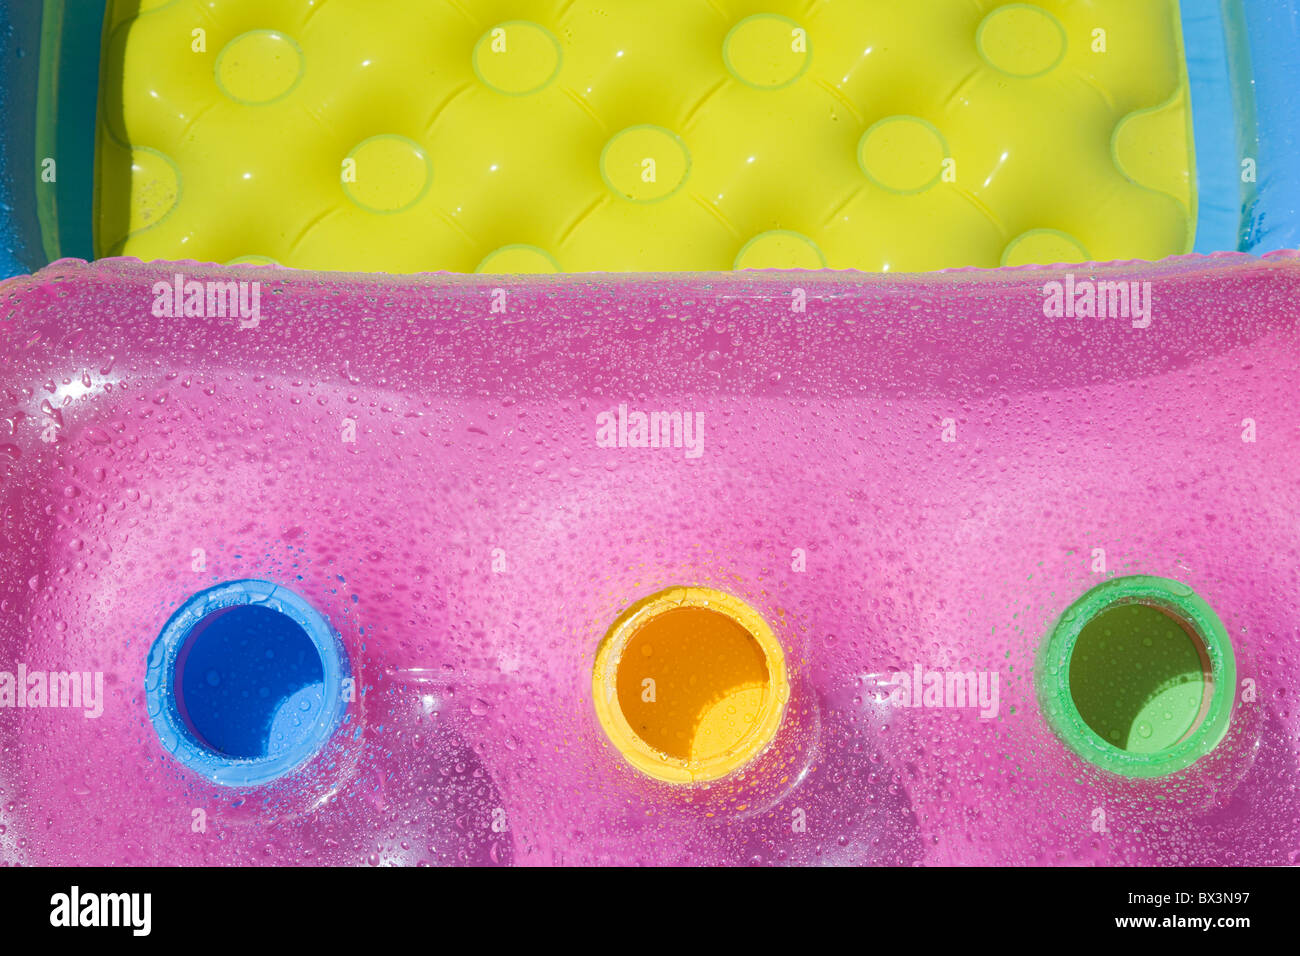 Air-bed and pool with fresh colors and water-drops Stock Photo